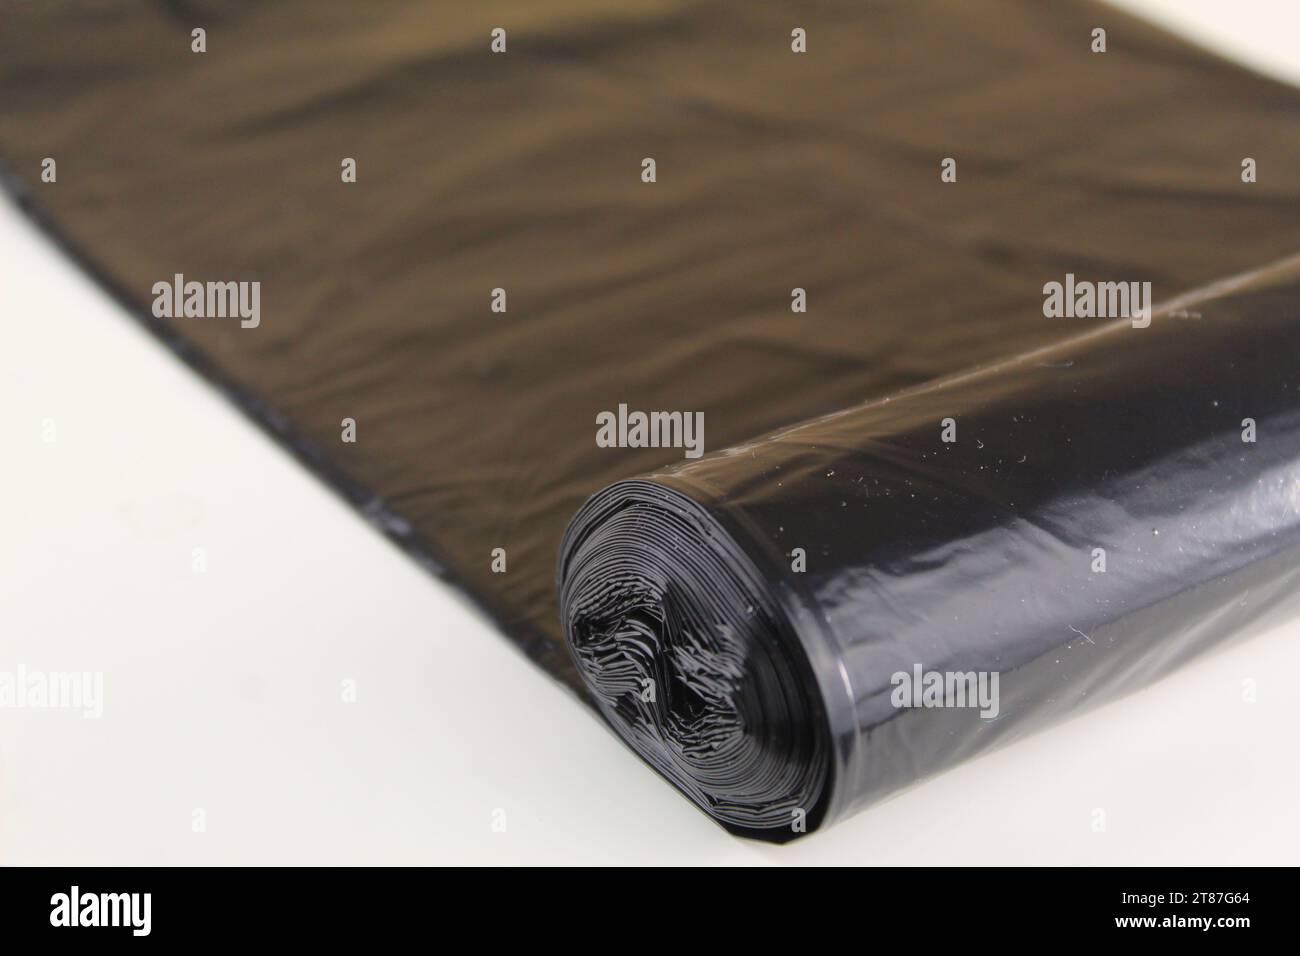 A photo of a black bin liner rolled out over a white surface. Stock Photo